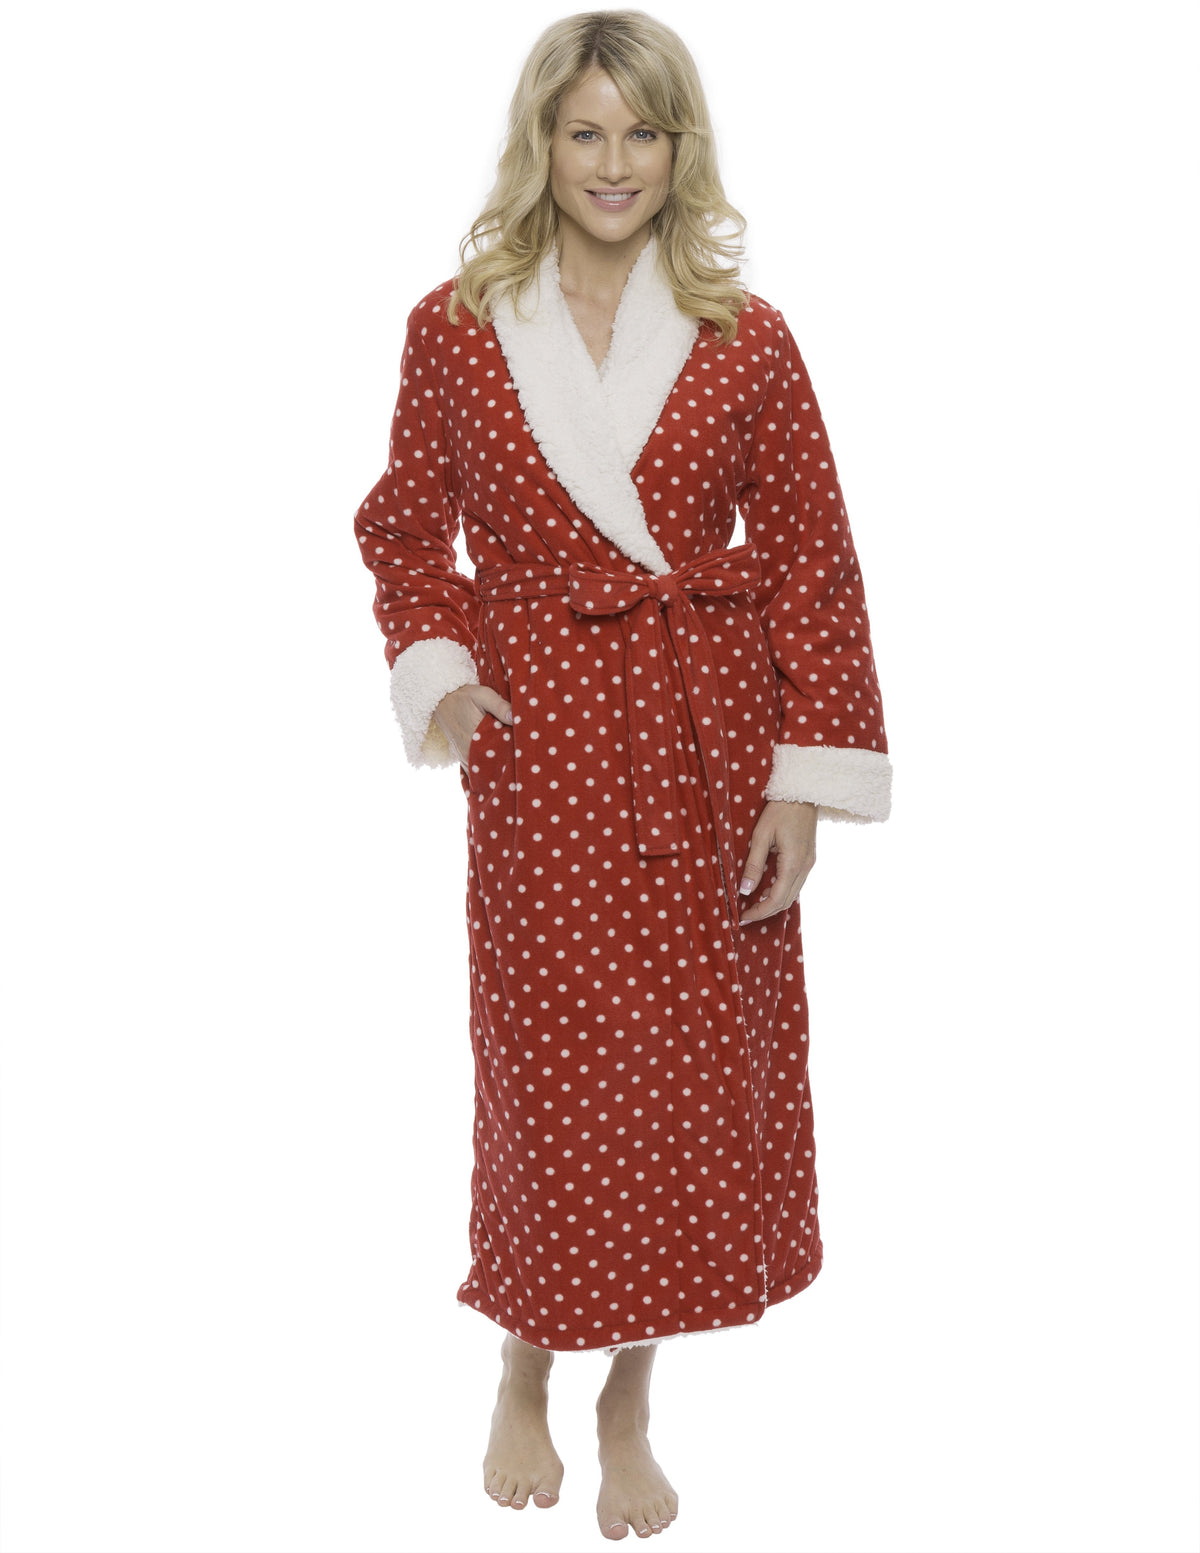 Womens Premium Microfleece Shearling Lined Robe - Dots Diva Red/White